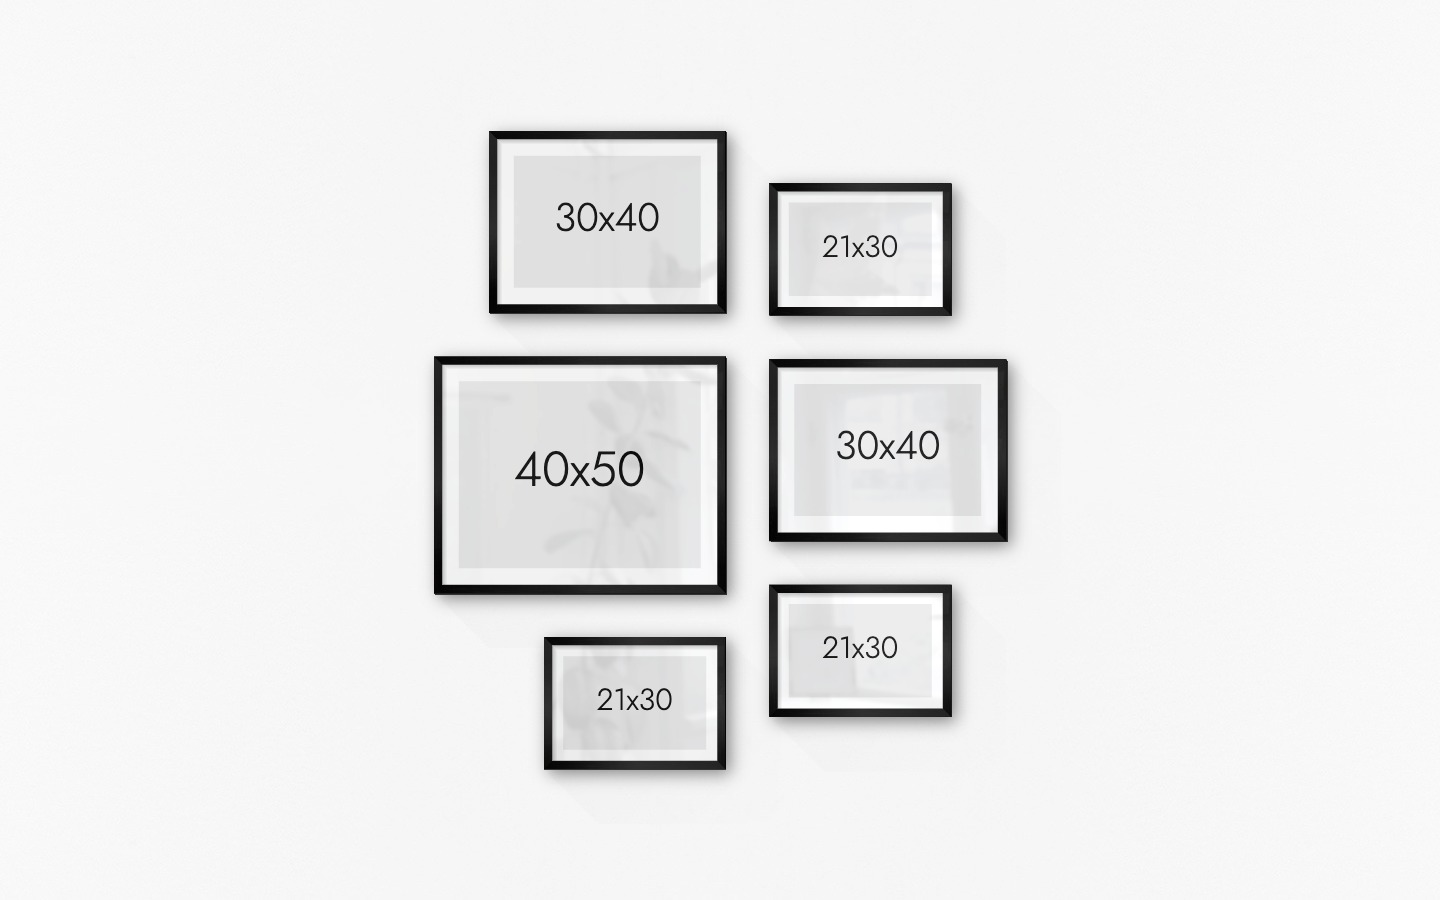 Gallery wall with picture frames in black in sizes 30x40, 40x50 and 21x30